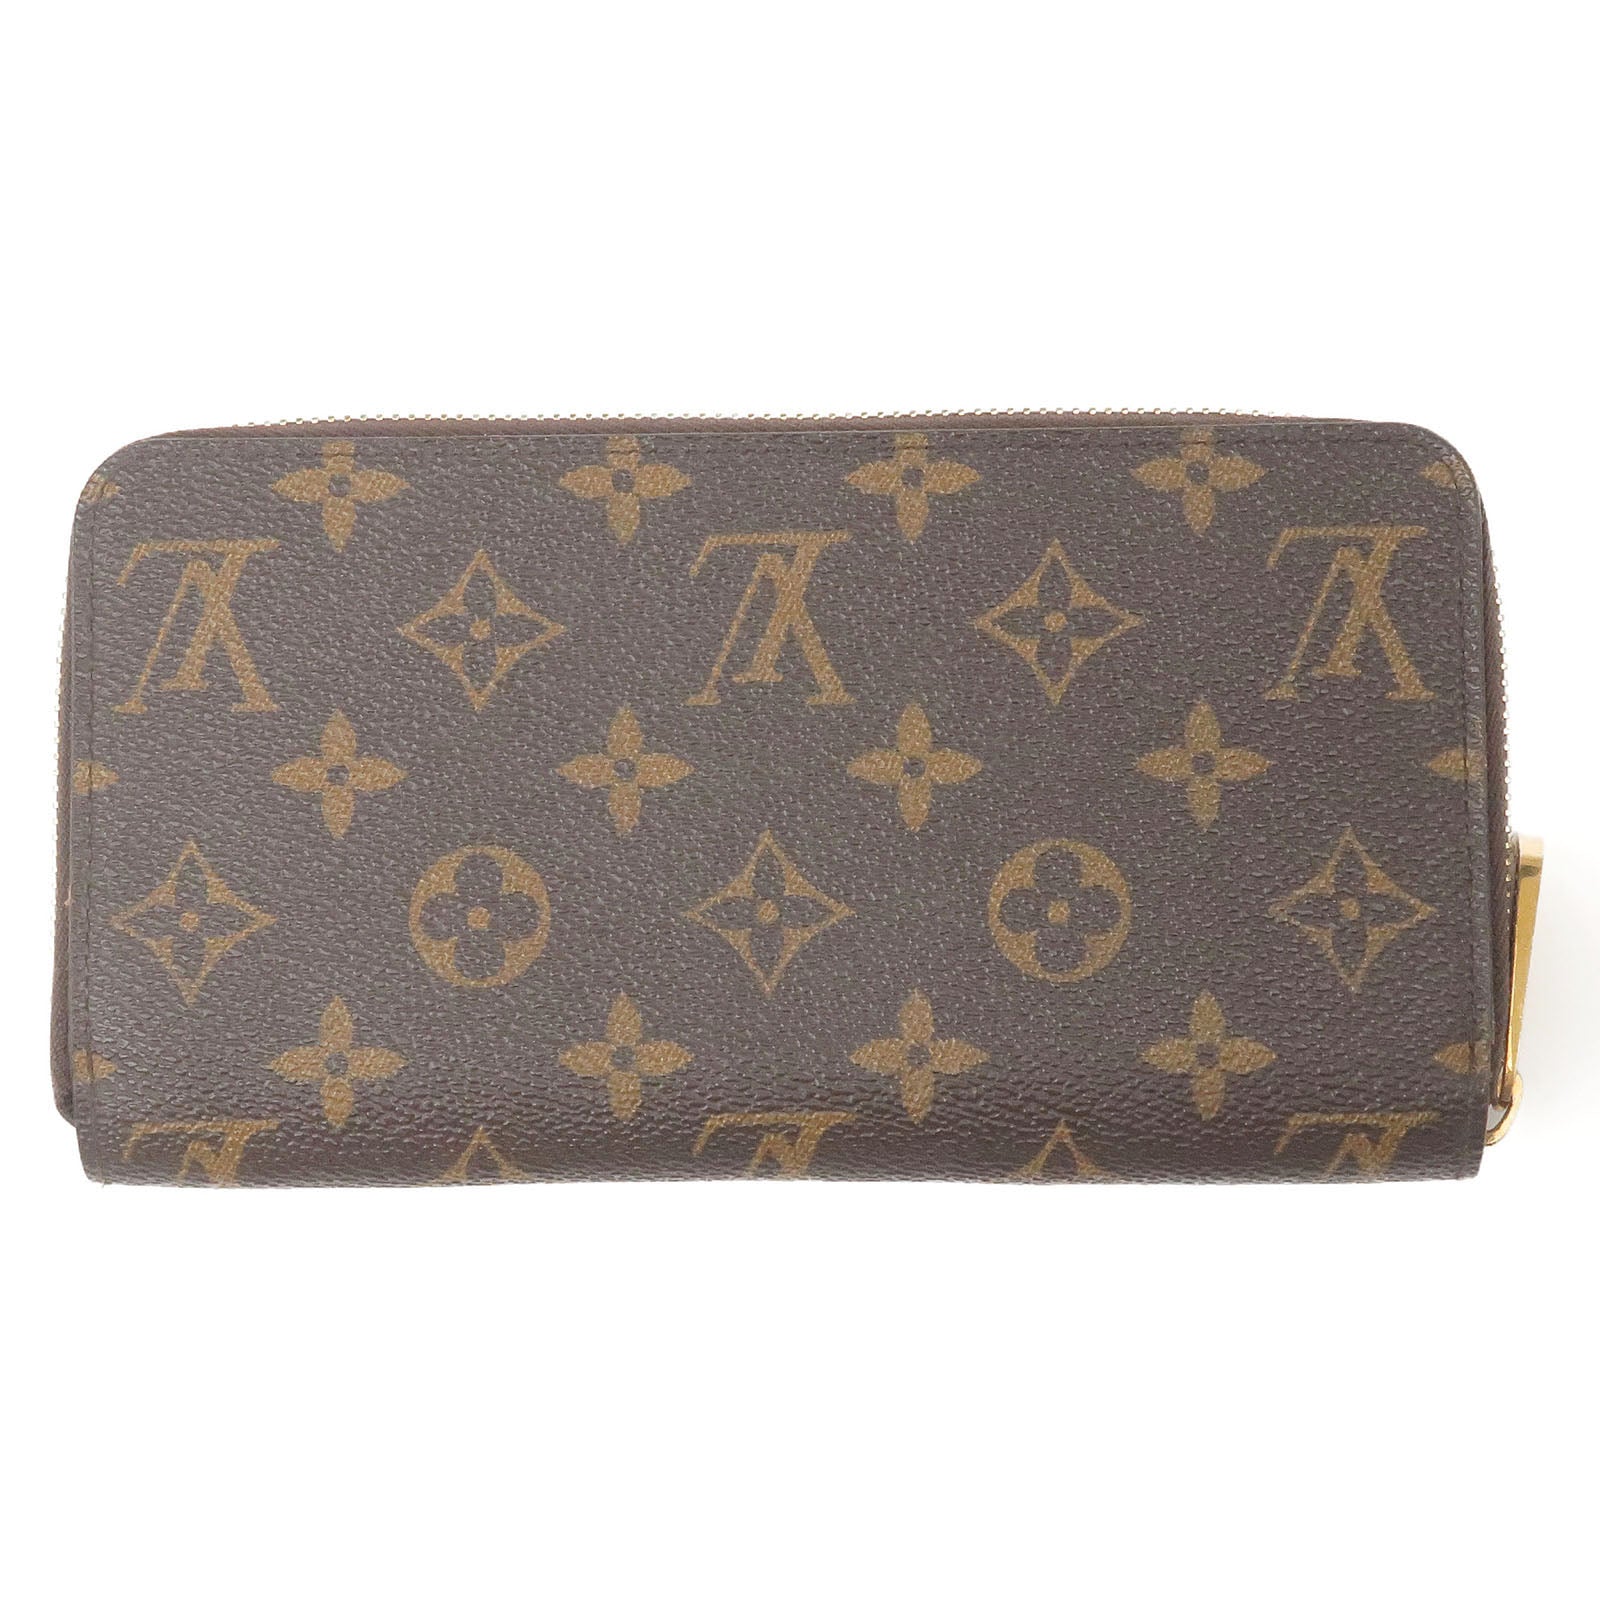 Zippy Wallet Monogram in Brown - Small Leather Goods M42616